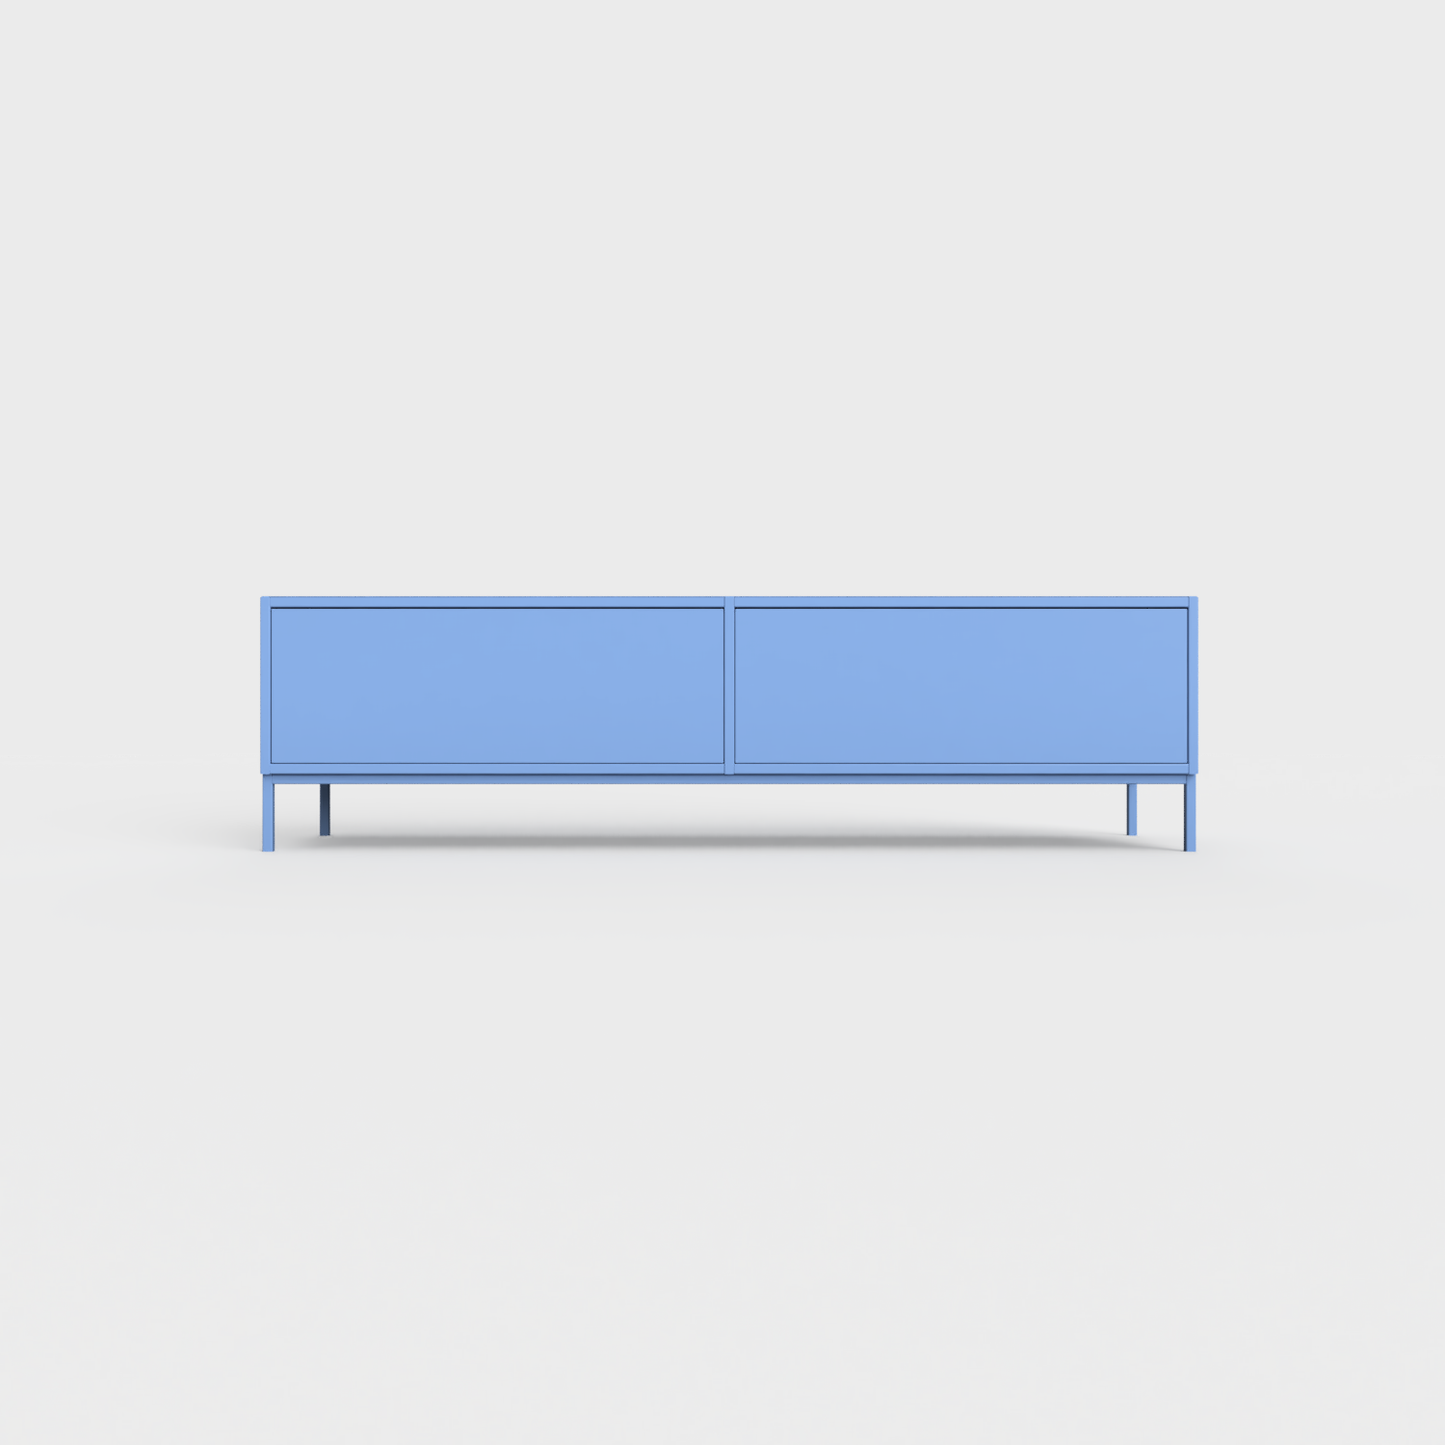 Prunus 01 Lowboard in Sky blue color, powder-coated steel, elegant and modern piece of furniture for your living room